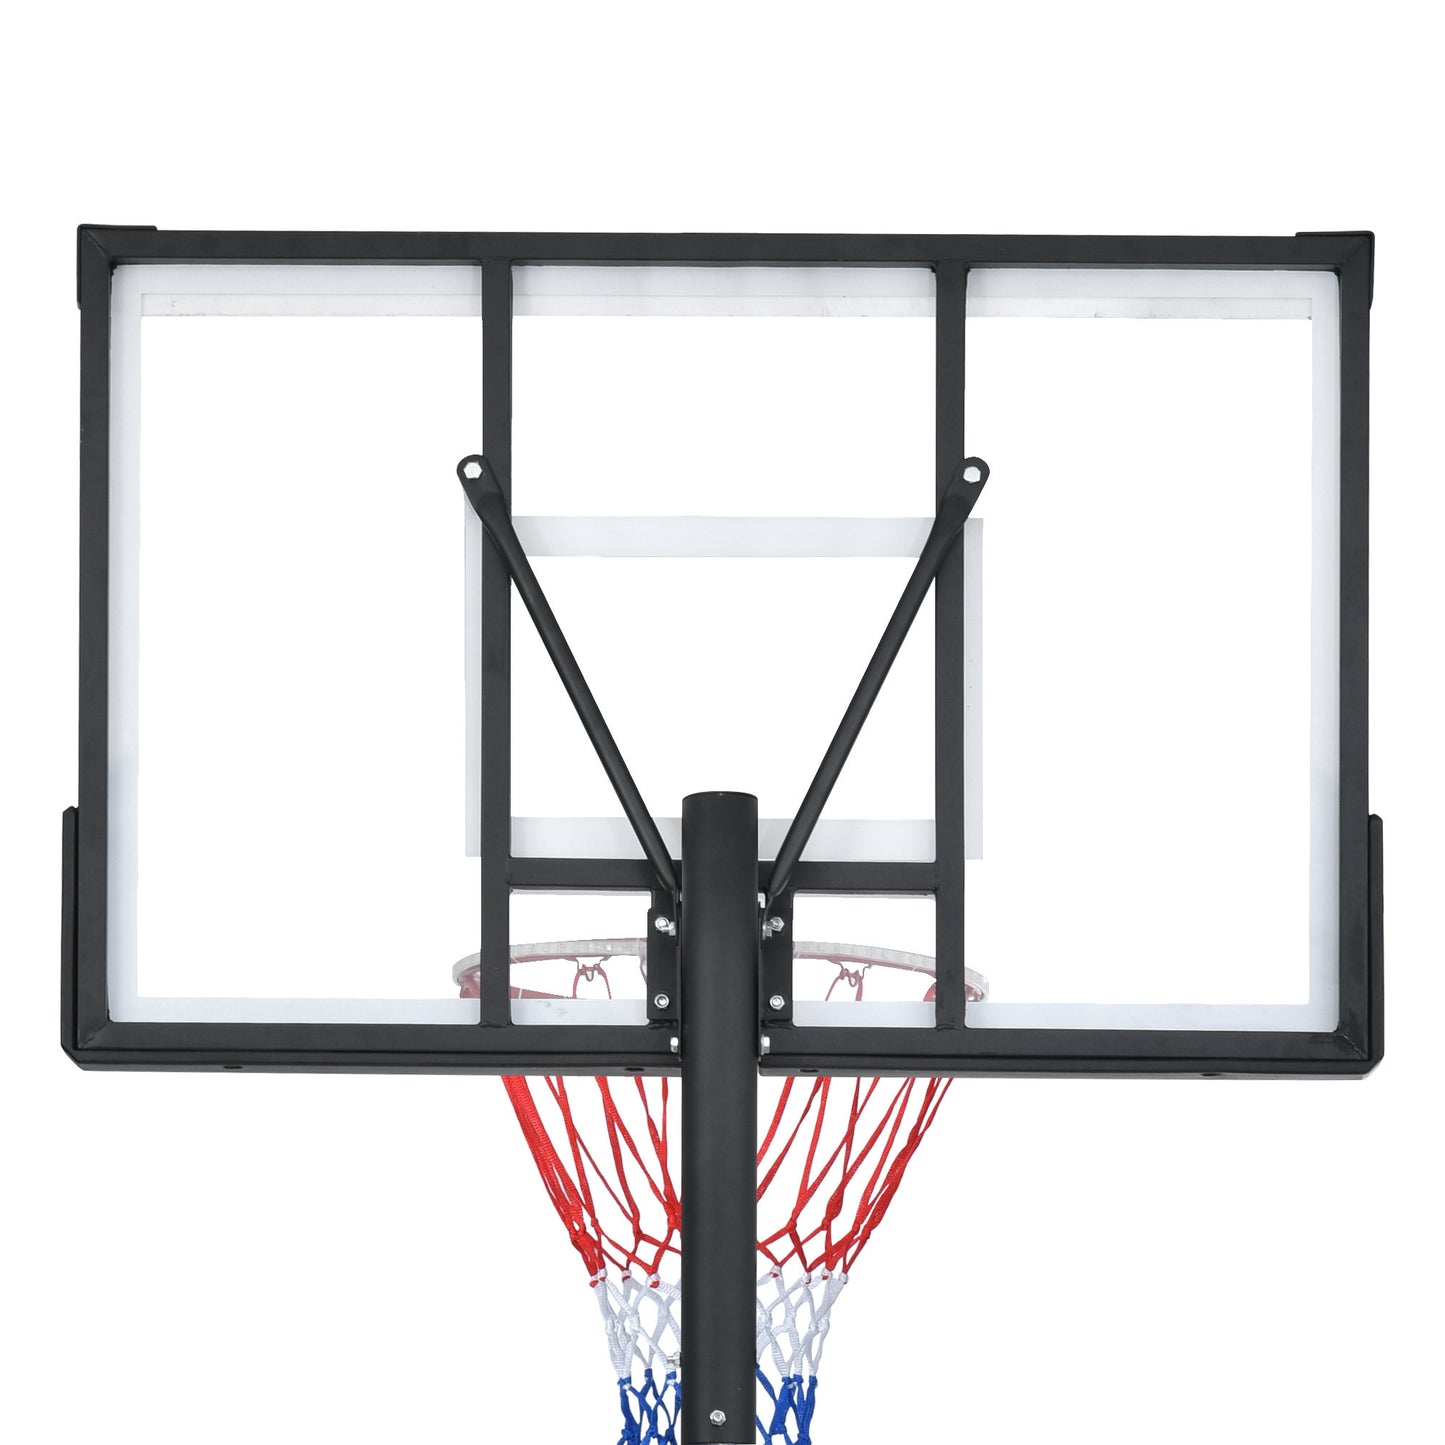 Portable Basketball Hoop Basketball System 4.76-10ft Height Adjustment for Youth Adults LED Basketball Hoop Lights, Colorful lights, Waterproof，Super Bright to Play at Night Outdoors,Good Gift for Kid